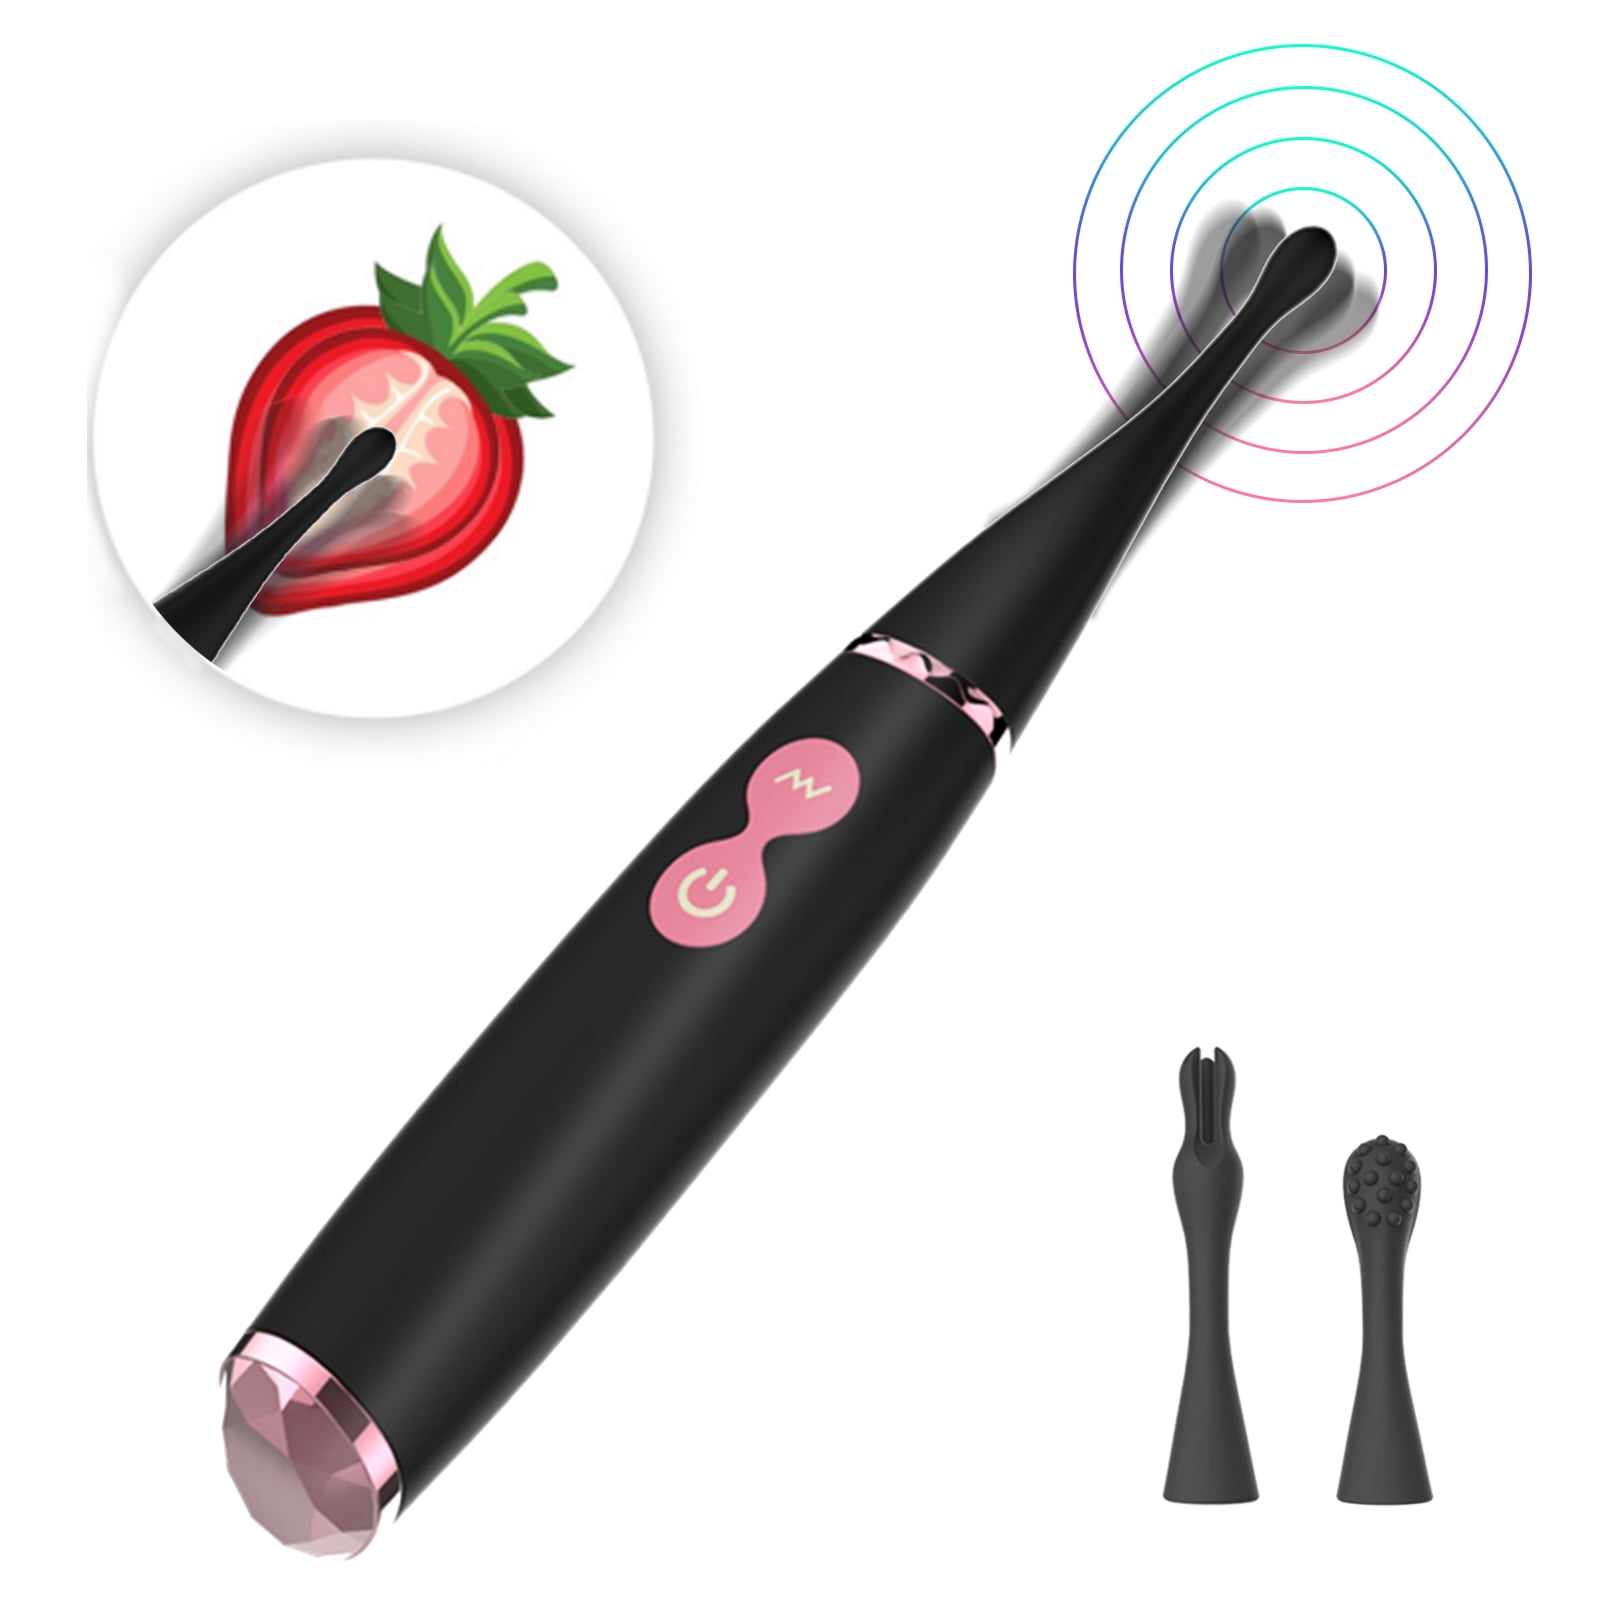 Wtoyu G-Spot Vibrators, 2-in-1 High Frequency Clit Vibrator with Whirling Vibration, Waterproof Discreet Adult Sex Toys for Women